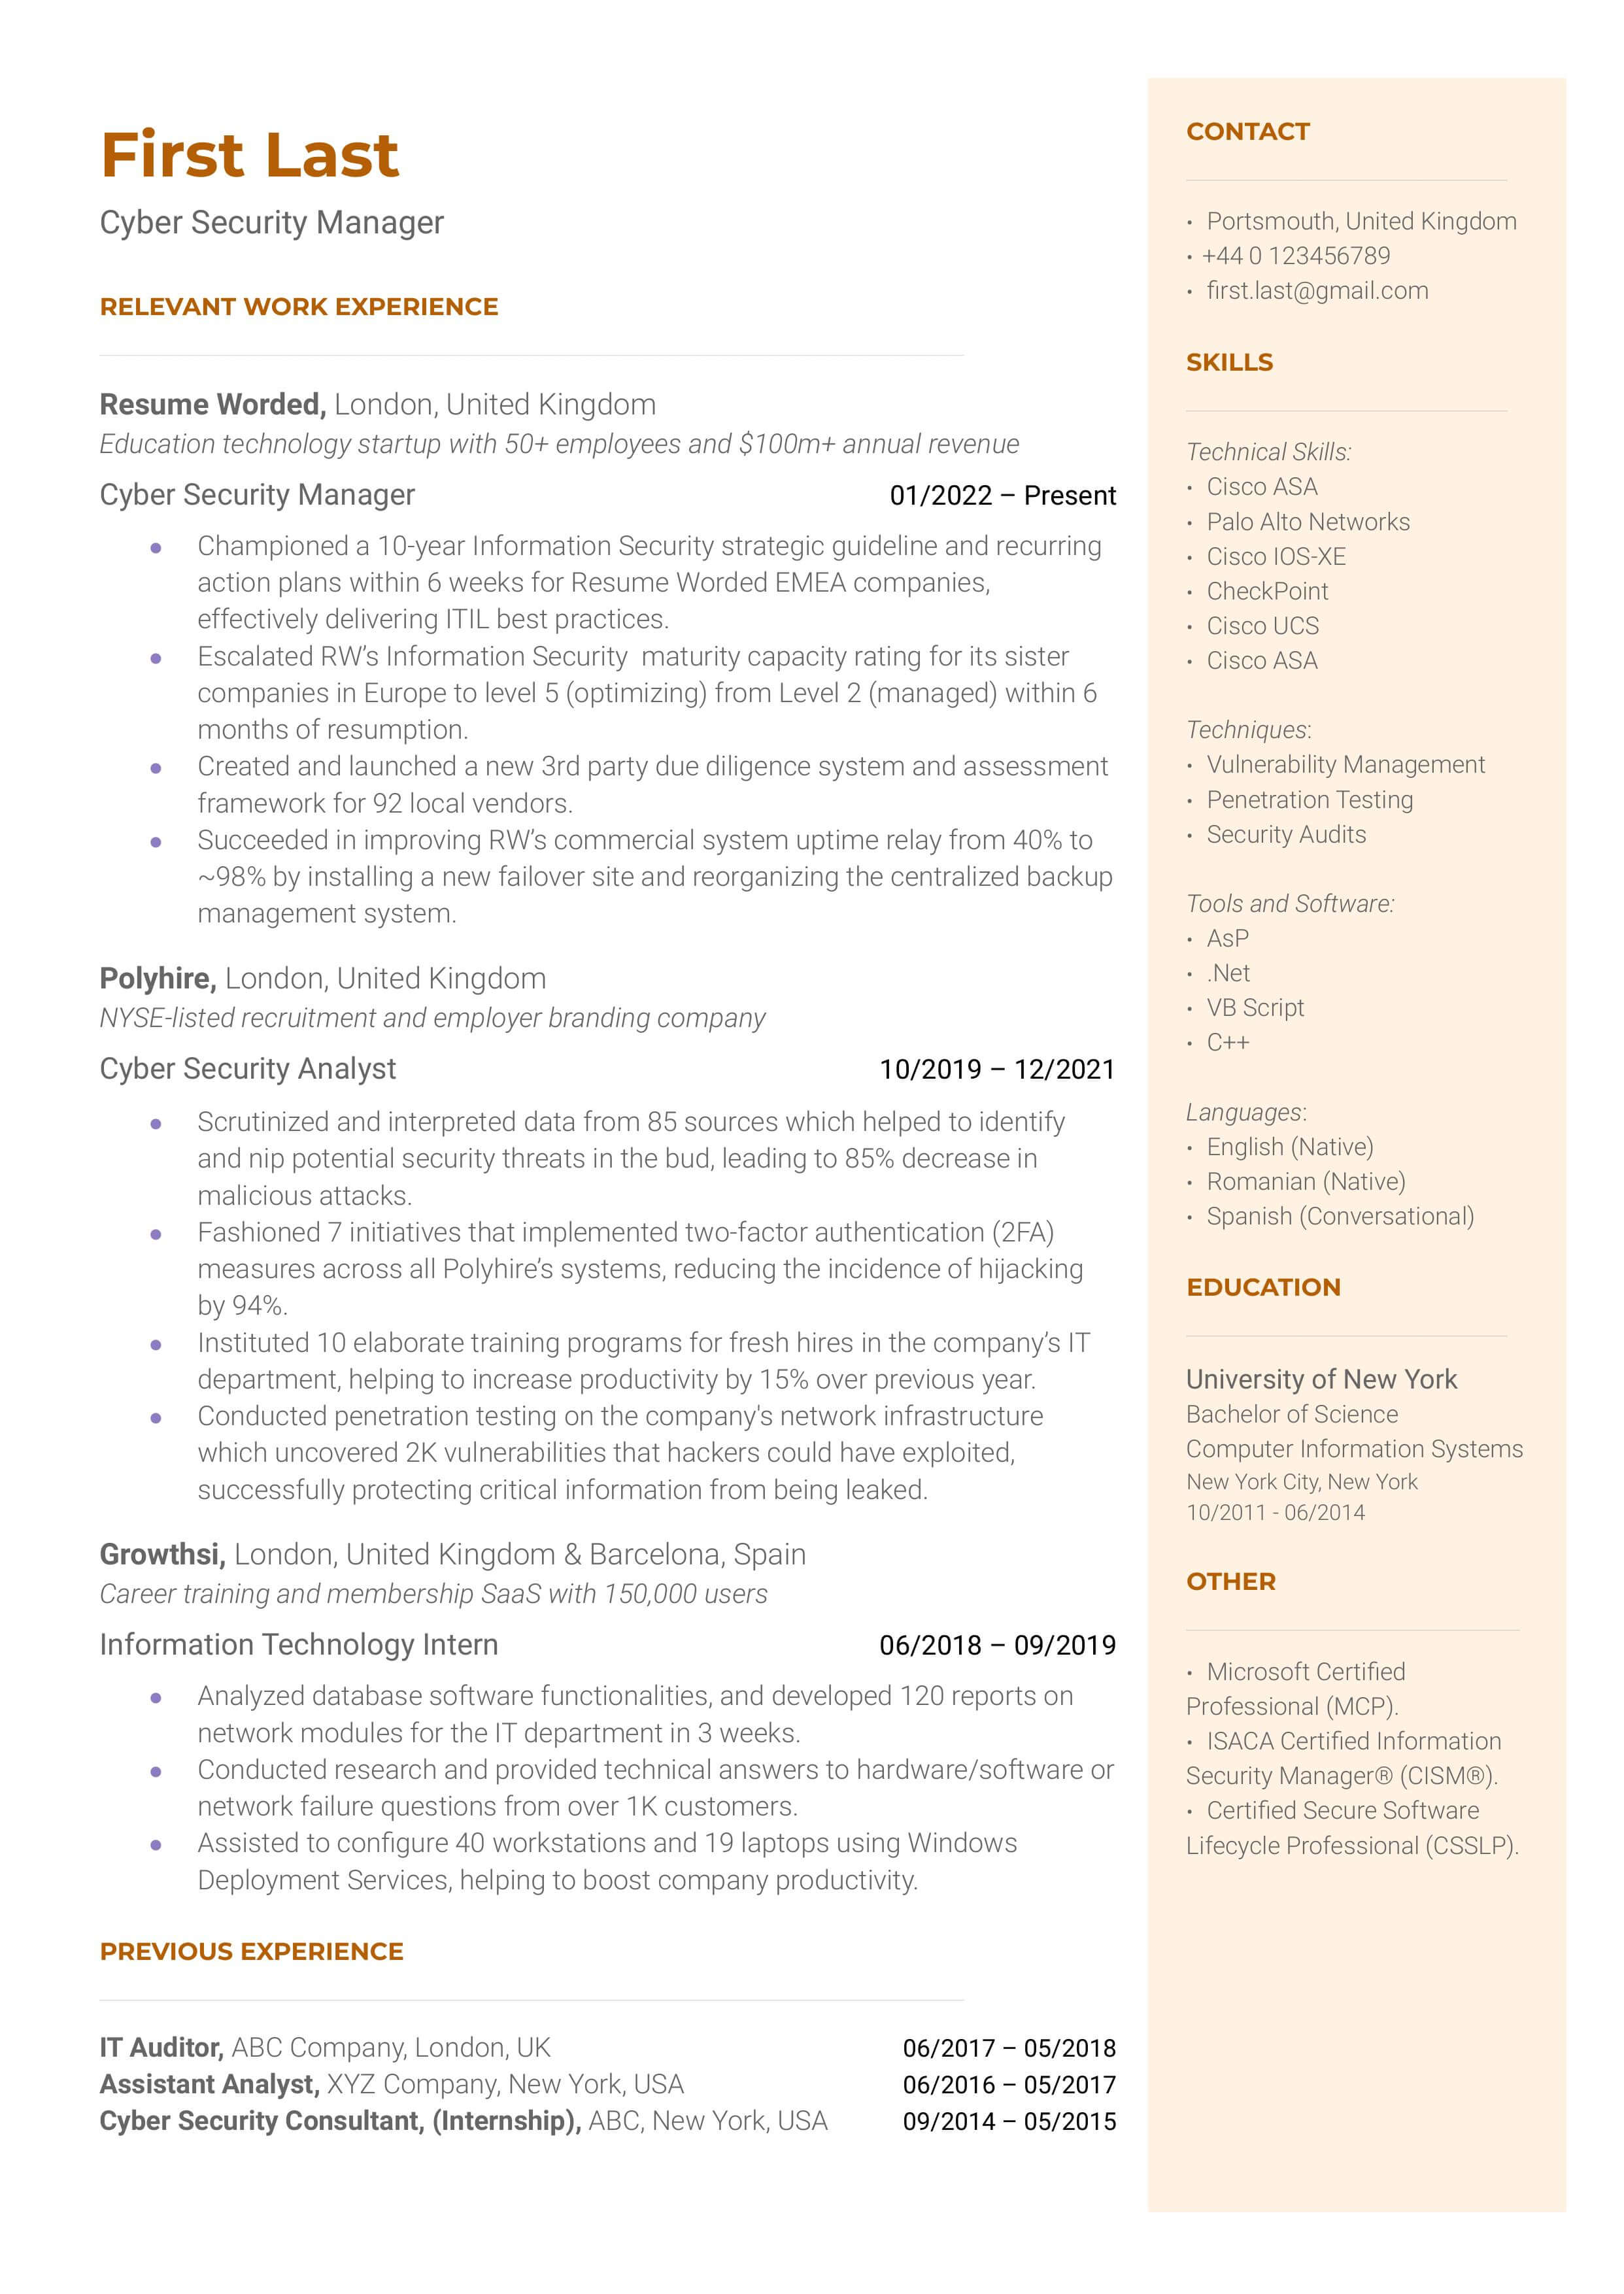 A template example resume regarding cyber security manager shows how to create a good resume